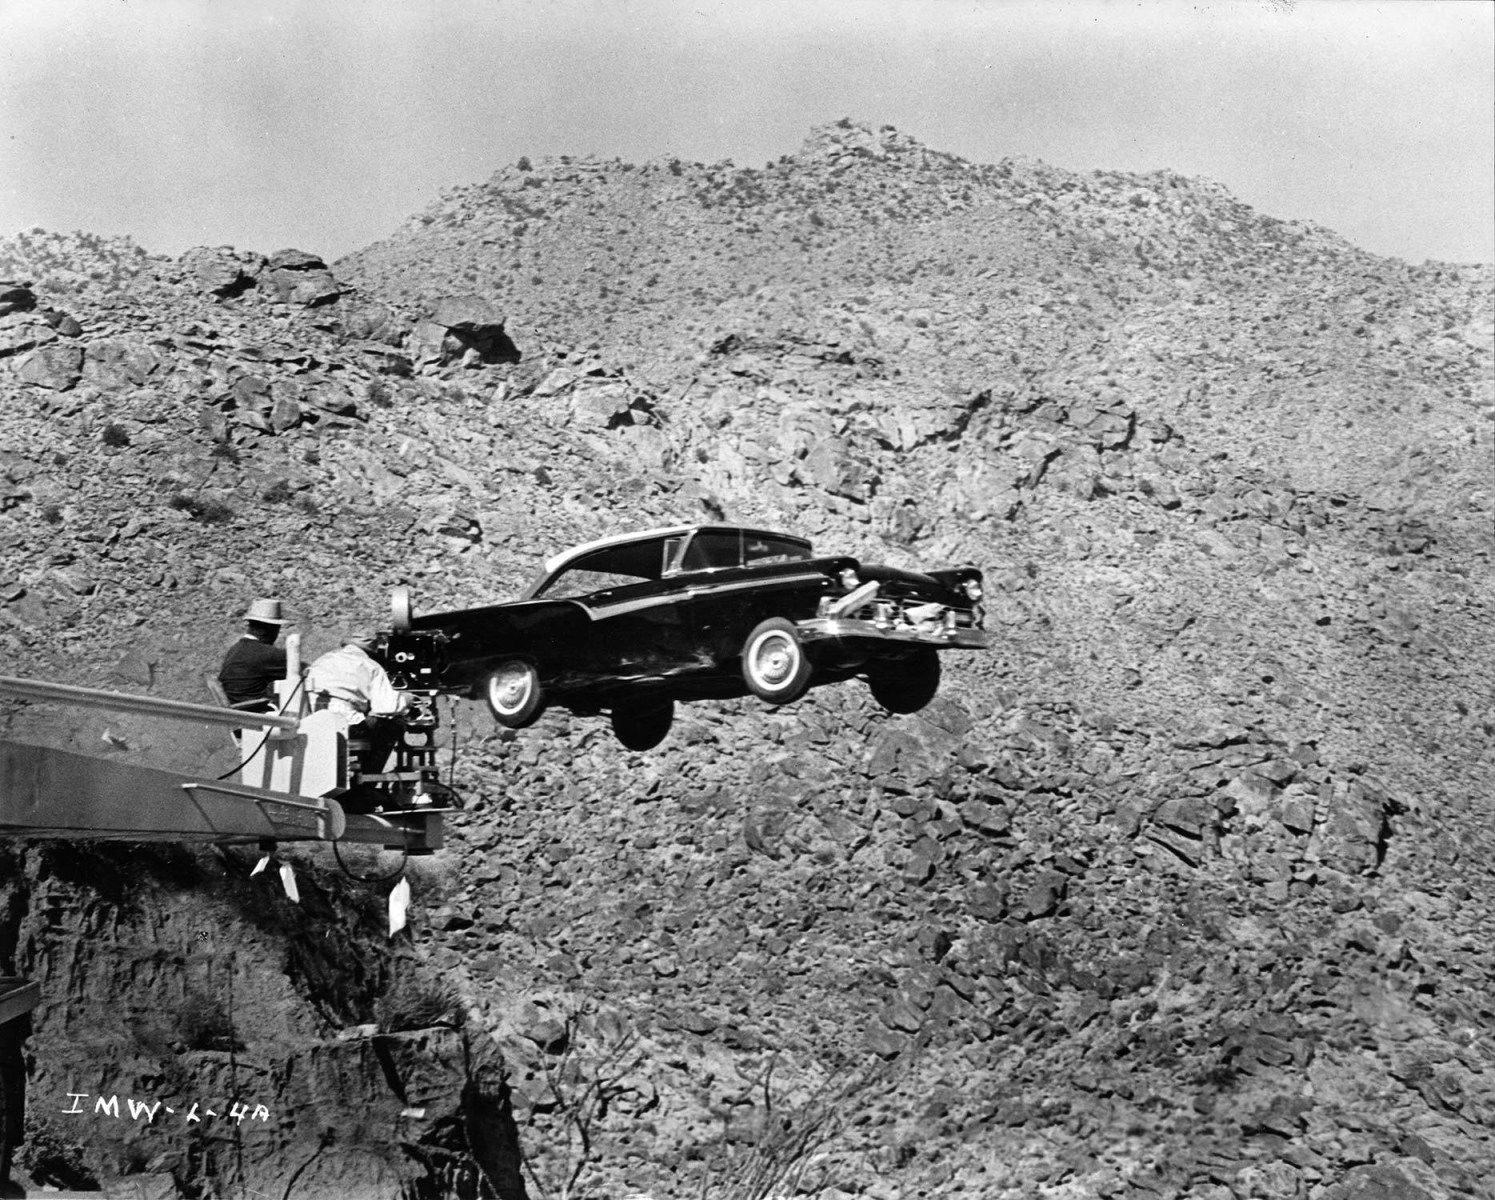 Filming It’s a Mad, Mad, Mad, Mad World (1963) Behind the Scenes